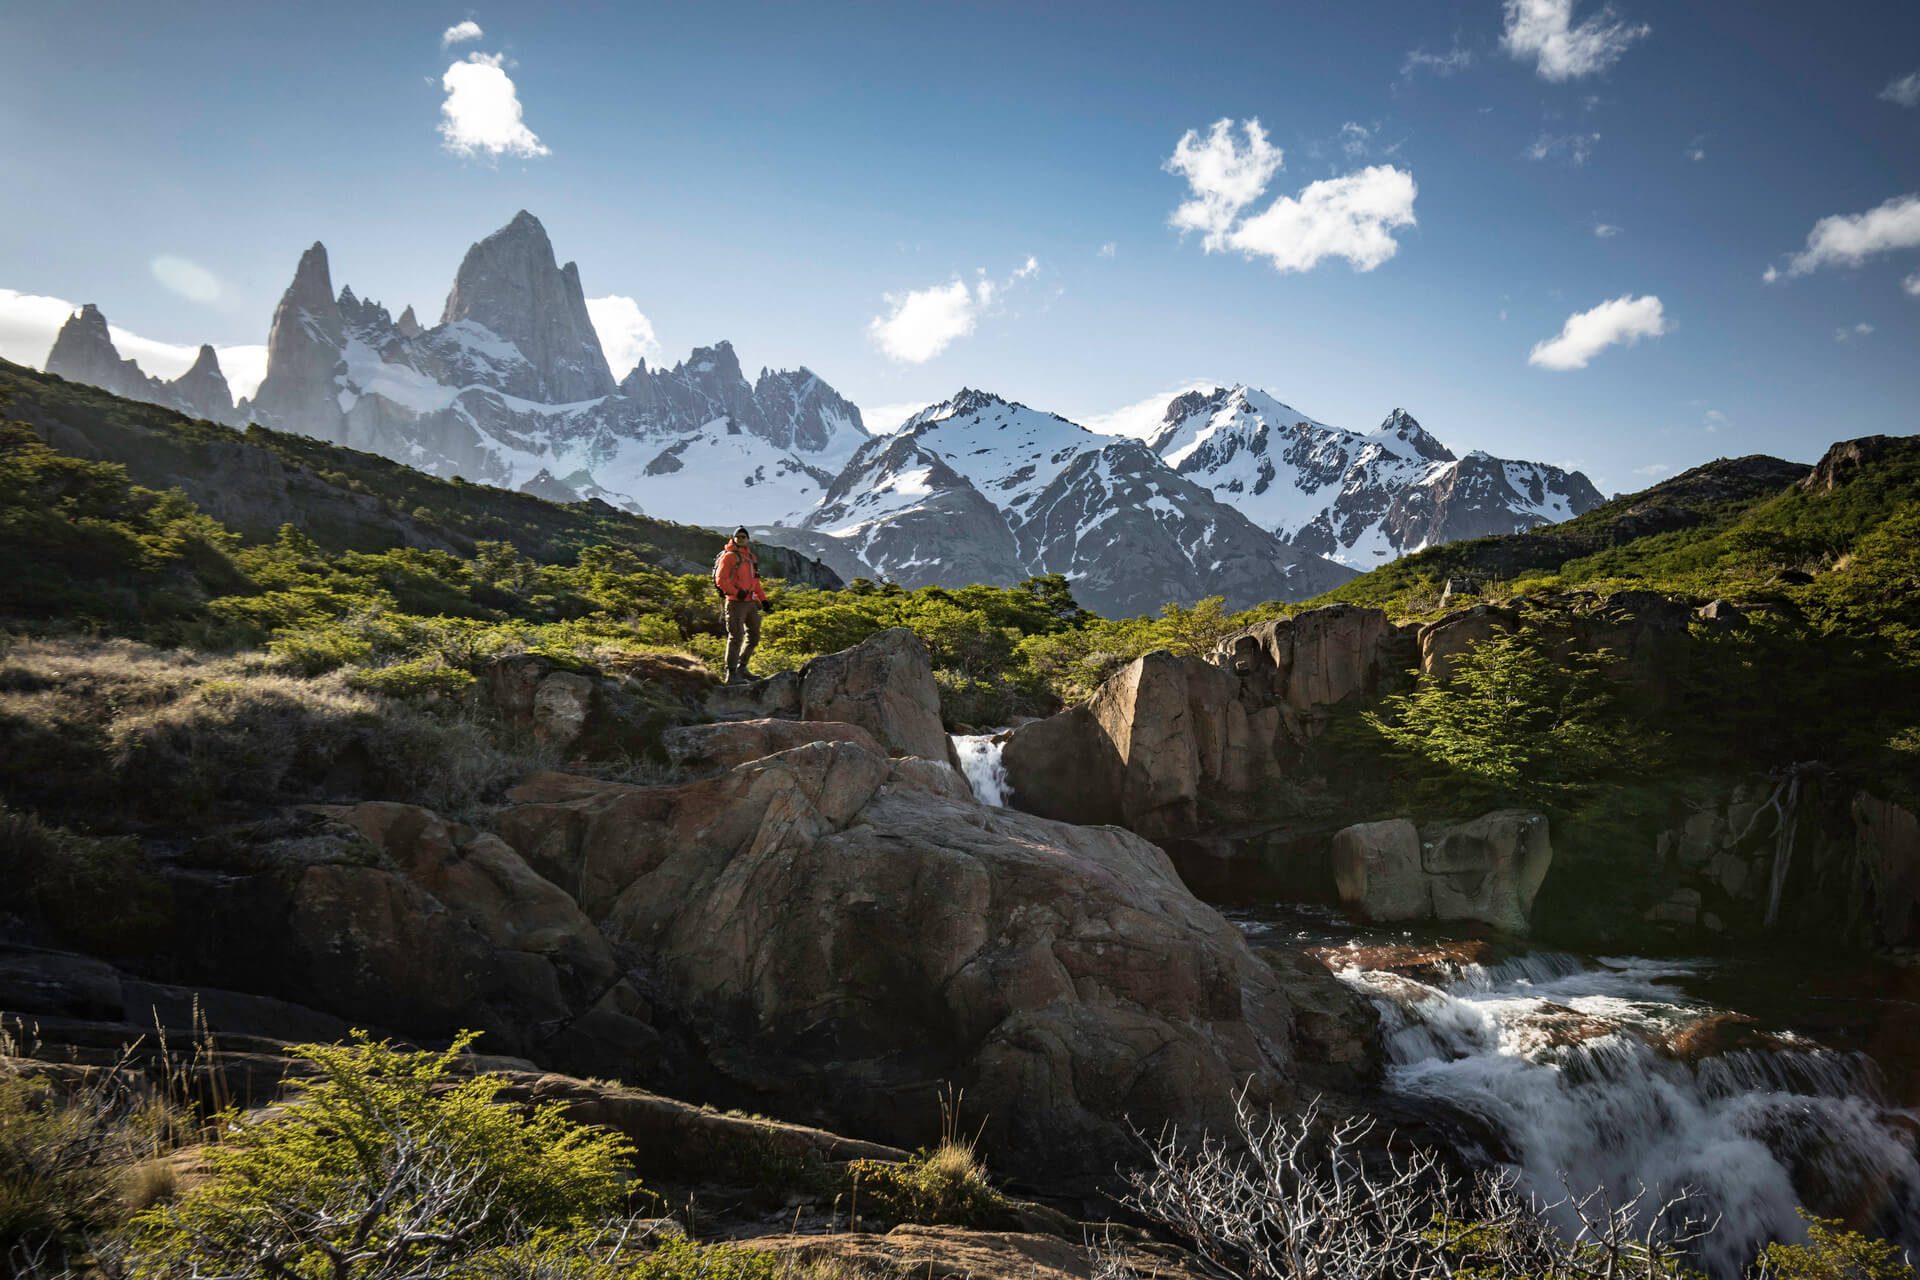 A hiker in Patagonia looking out over Monte Fitz Roy, Argentina